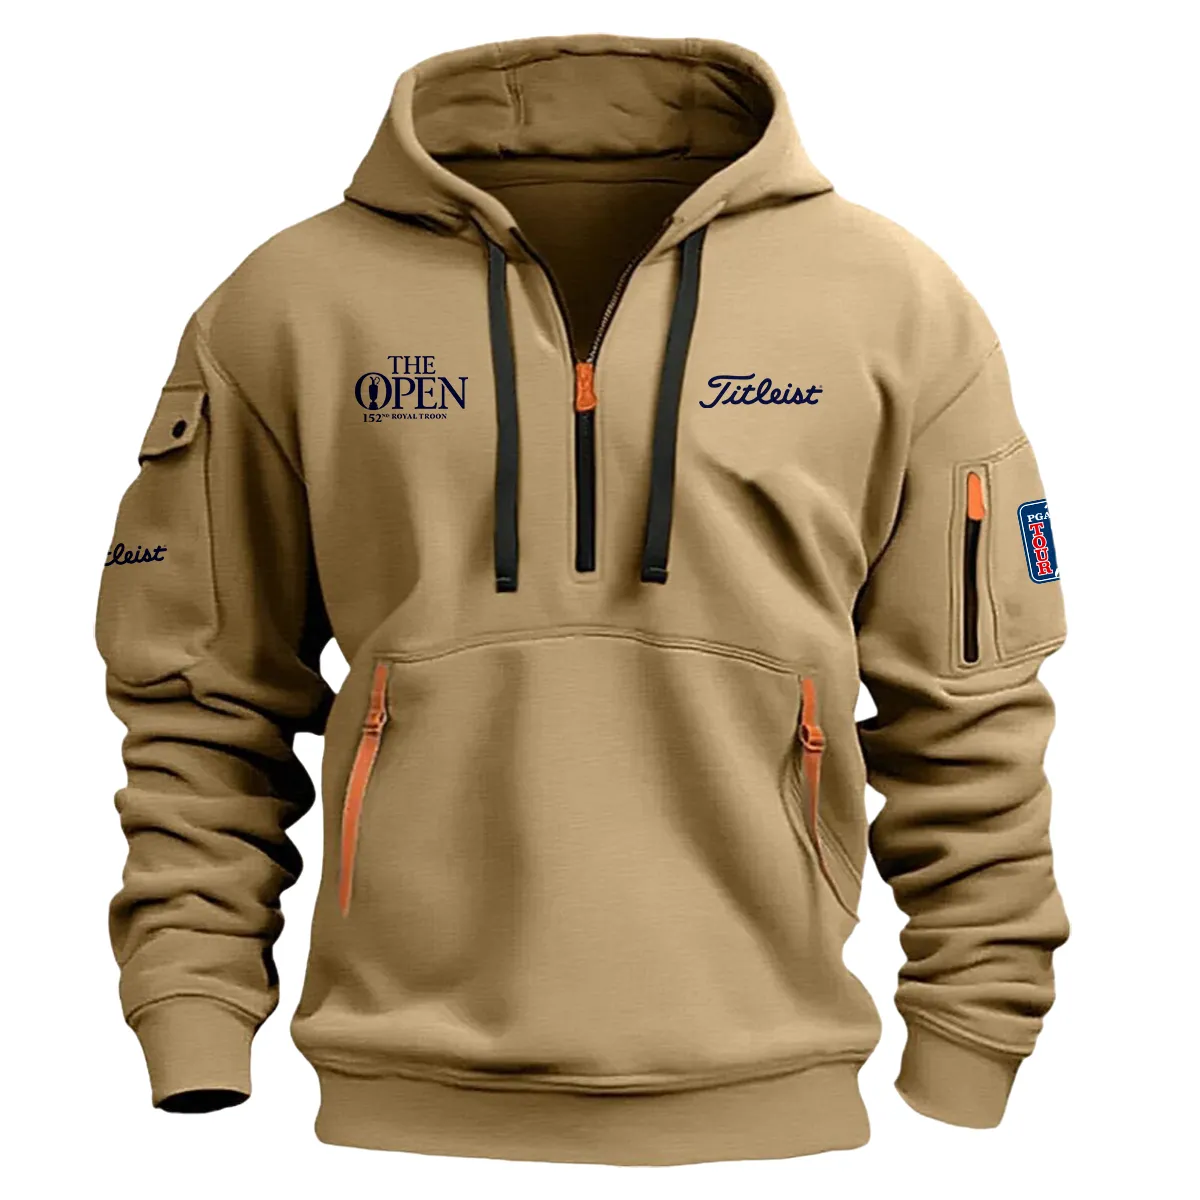 Khaki Color Titleist Fashion Hoodie Half Zipper 152nd The Open Championship Gift For Fans